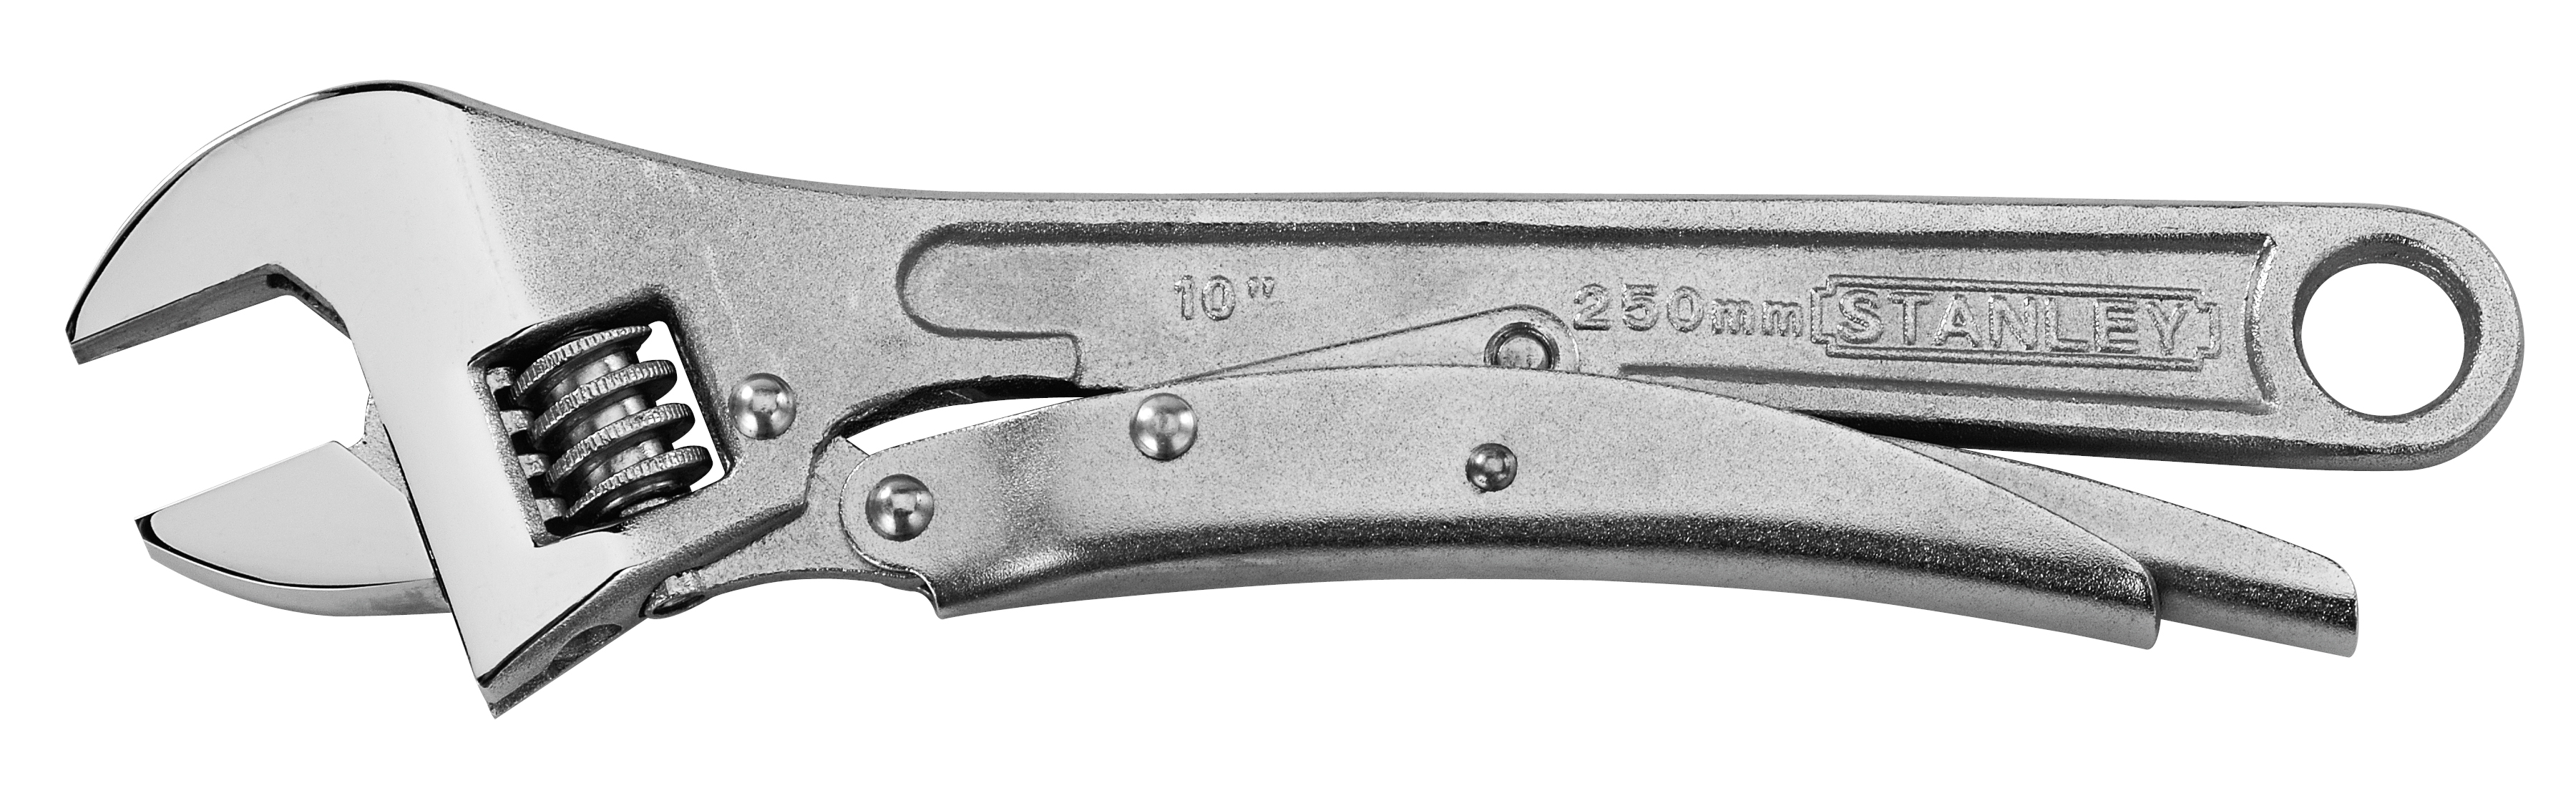 STANLEY 85-610W - 10'' Locking Adjustable Wrench - image 4 of 4